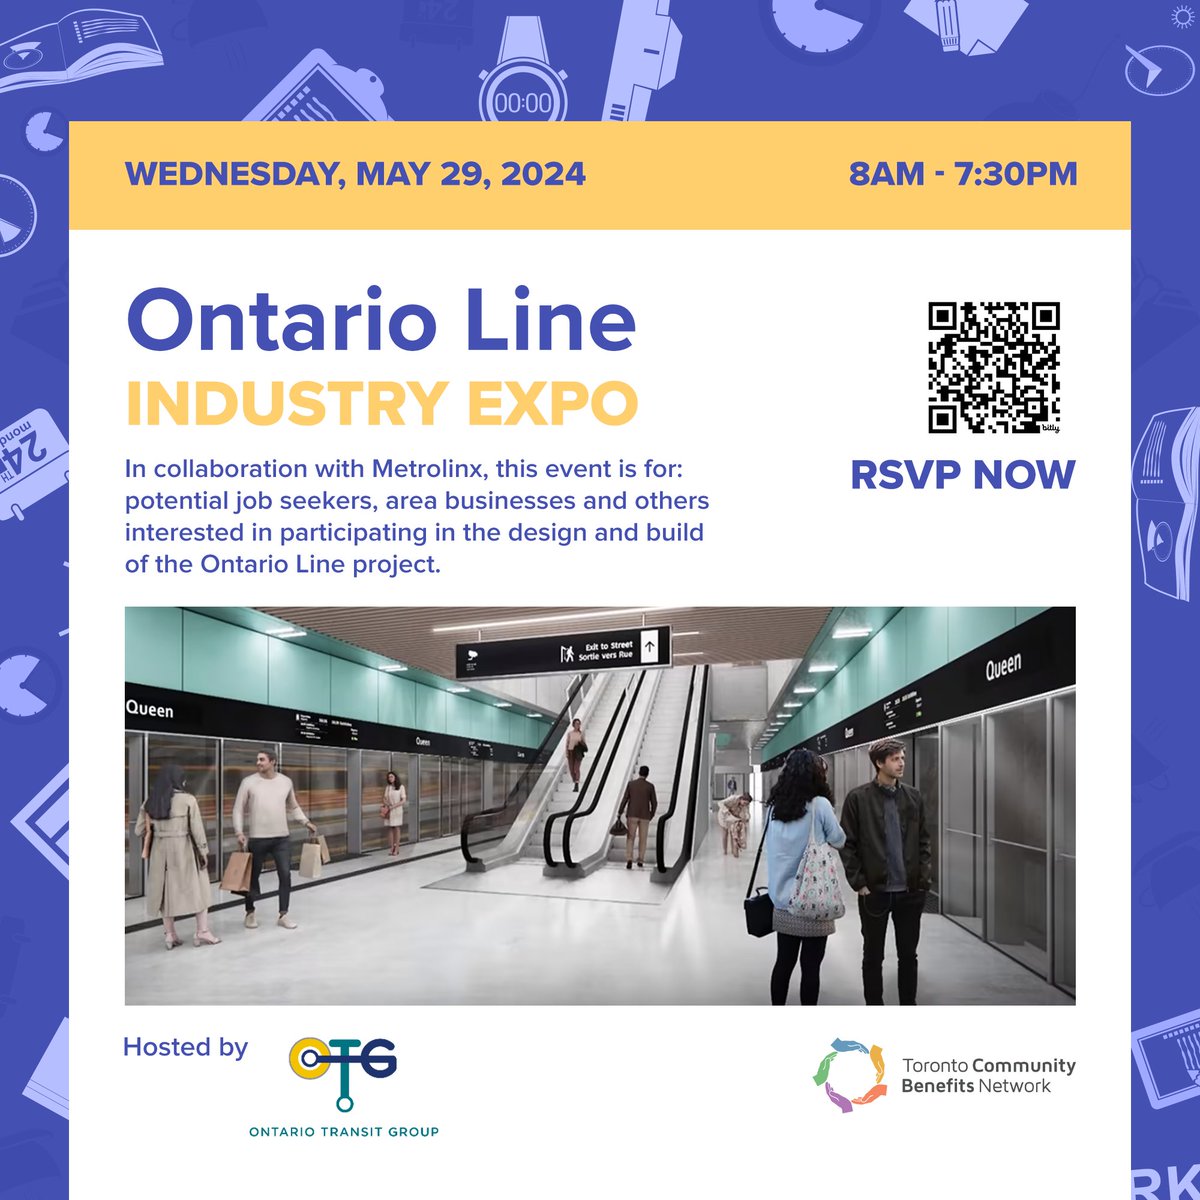 Happening Tomorrow!

Join us for the Ontario Line Industry Expo in collaboration with @Metrolinx

When: May 29, 8 AM - 7:30 PM
Hosted by Ontario Transit Group
Where: 123 Queen St W
RSVP: eventbrite.com/e/ontario-line…

#ontarioline #communitybenefits